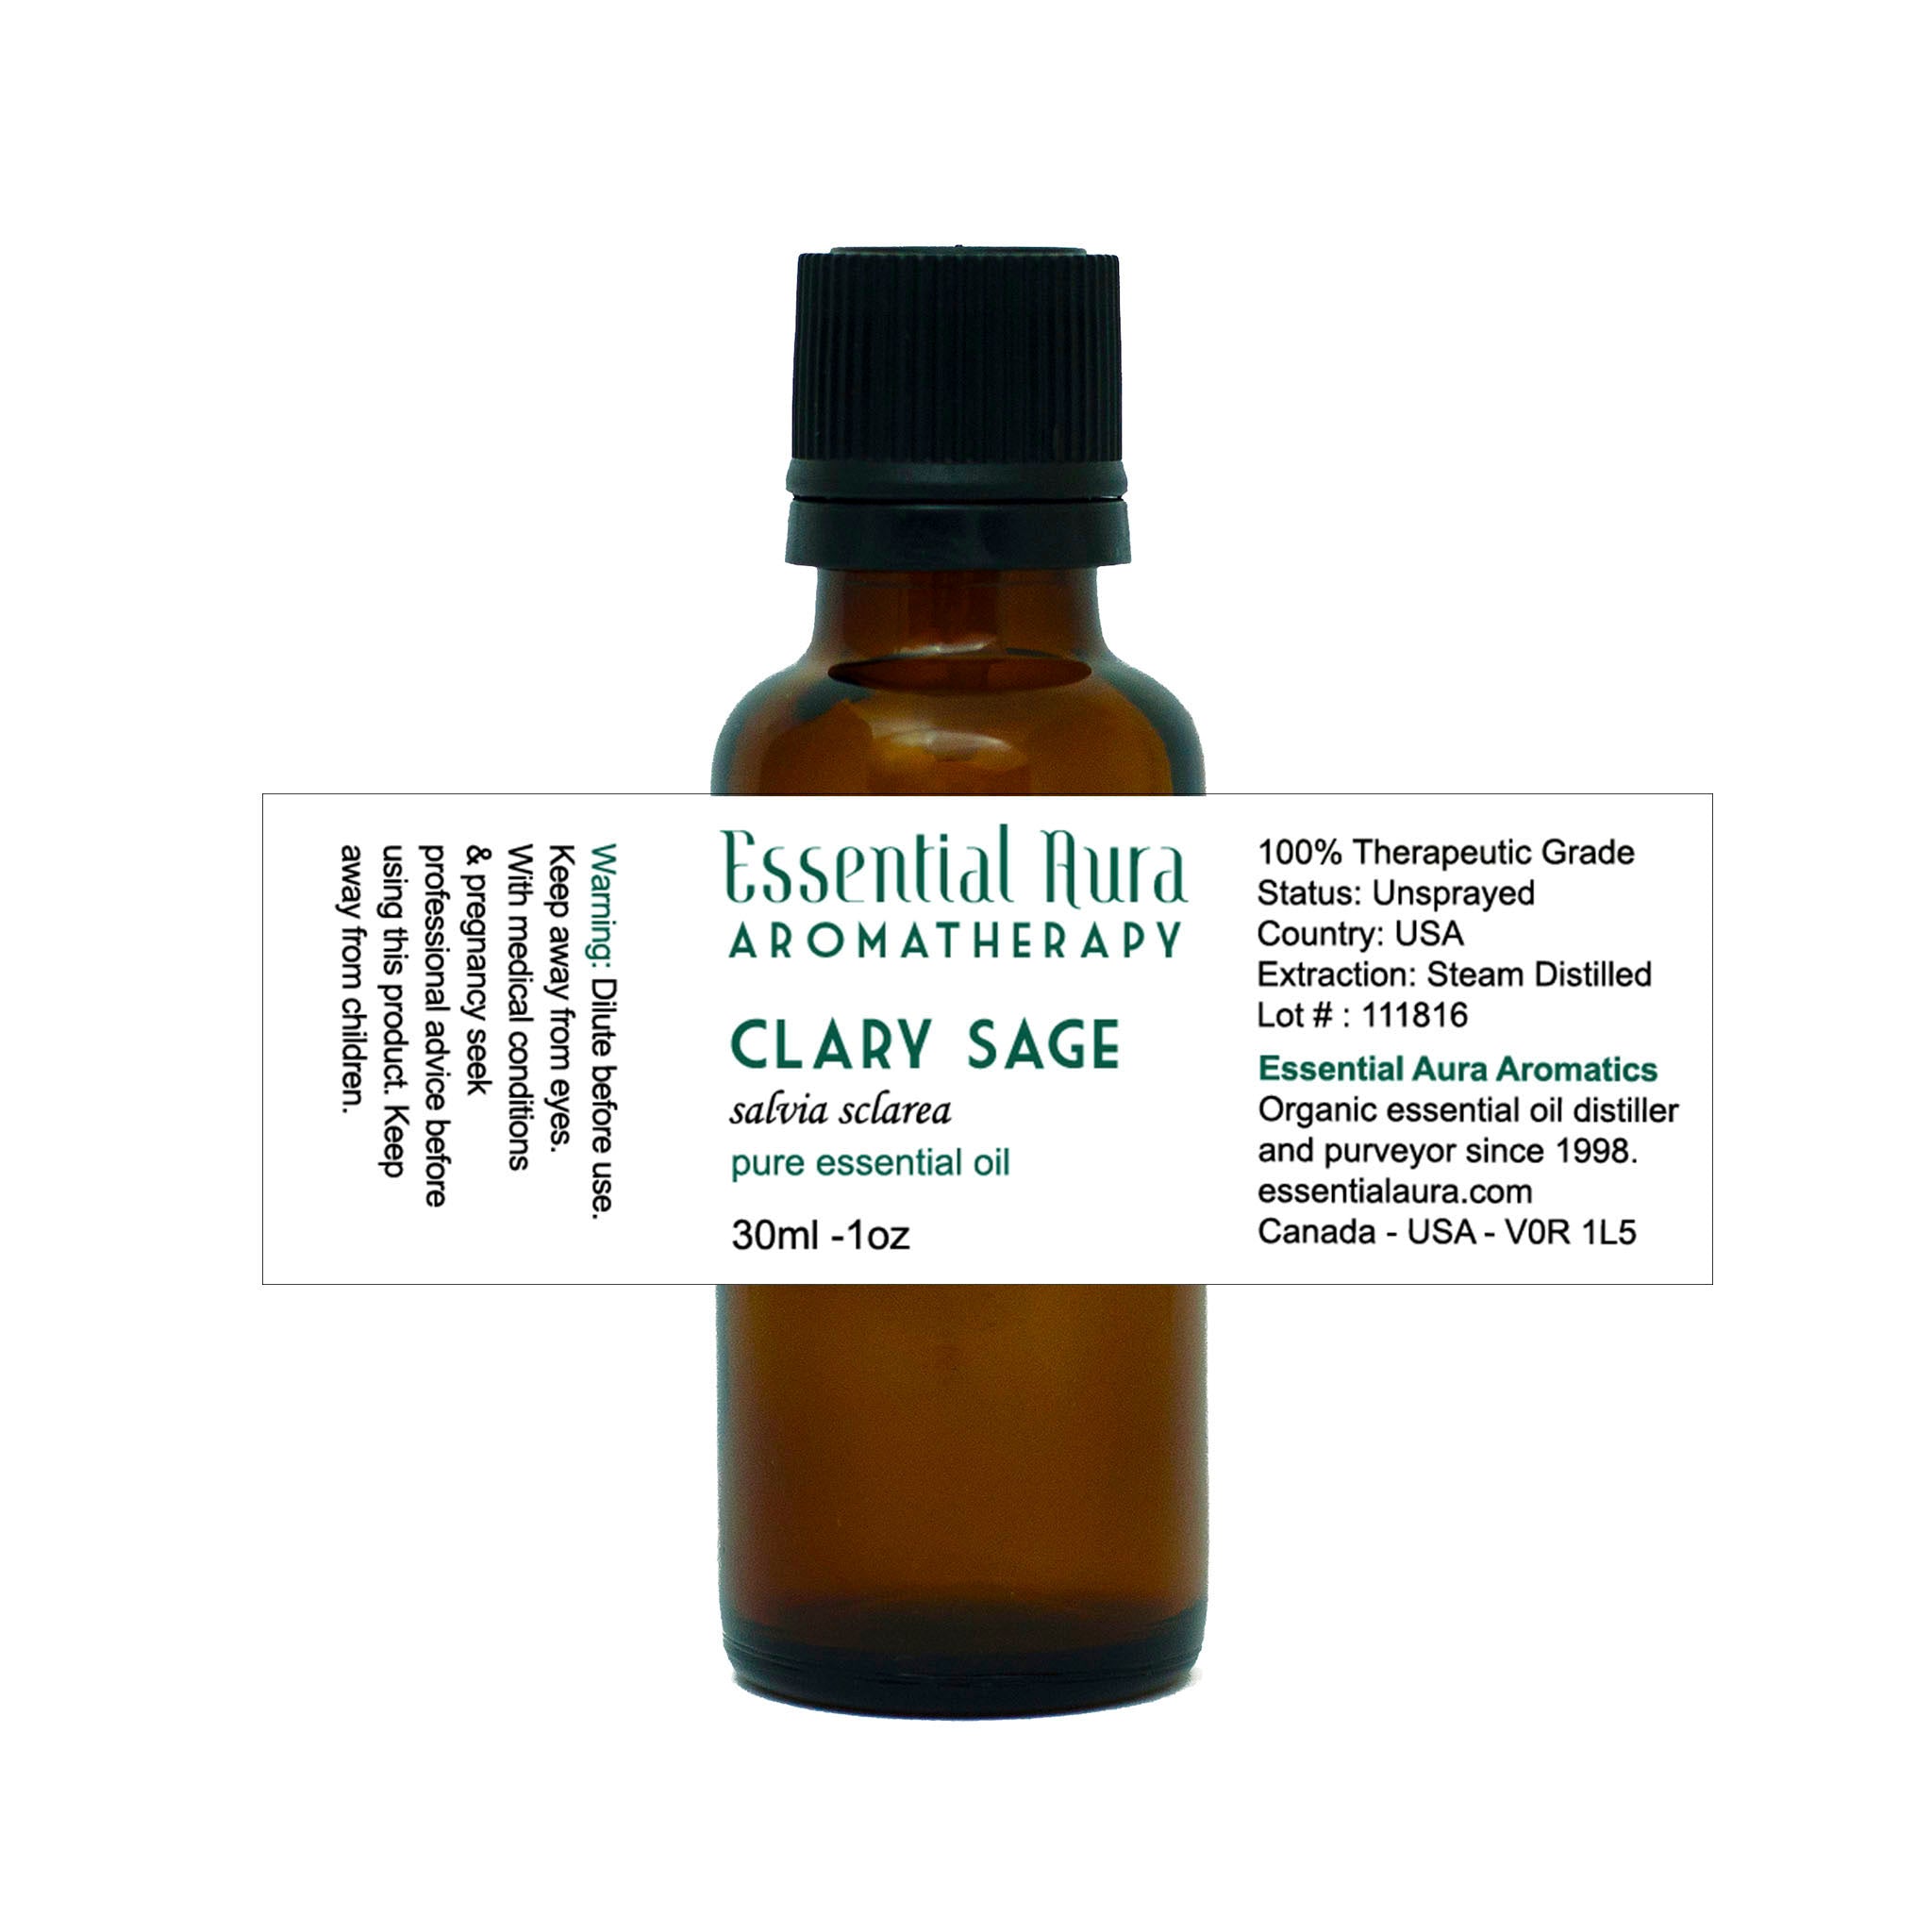 clary sage essential oil in bottle